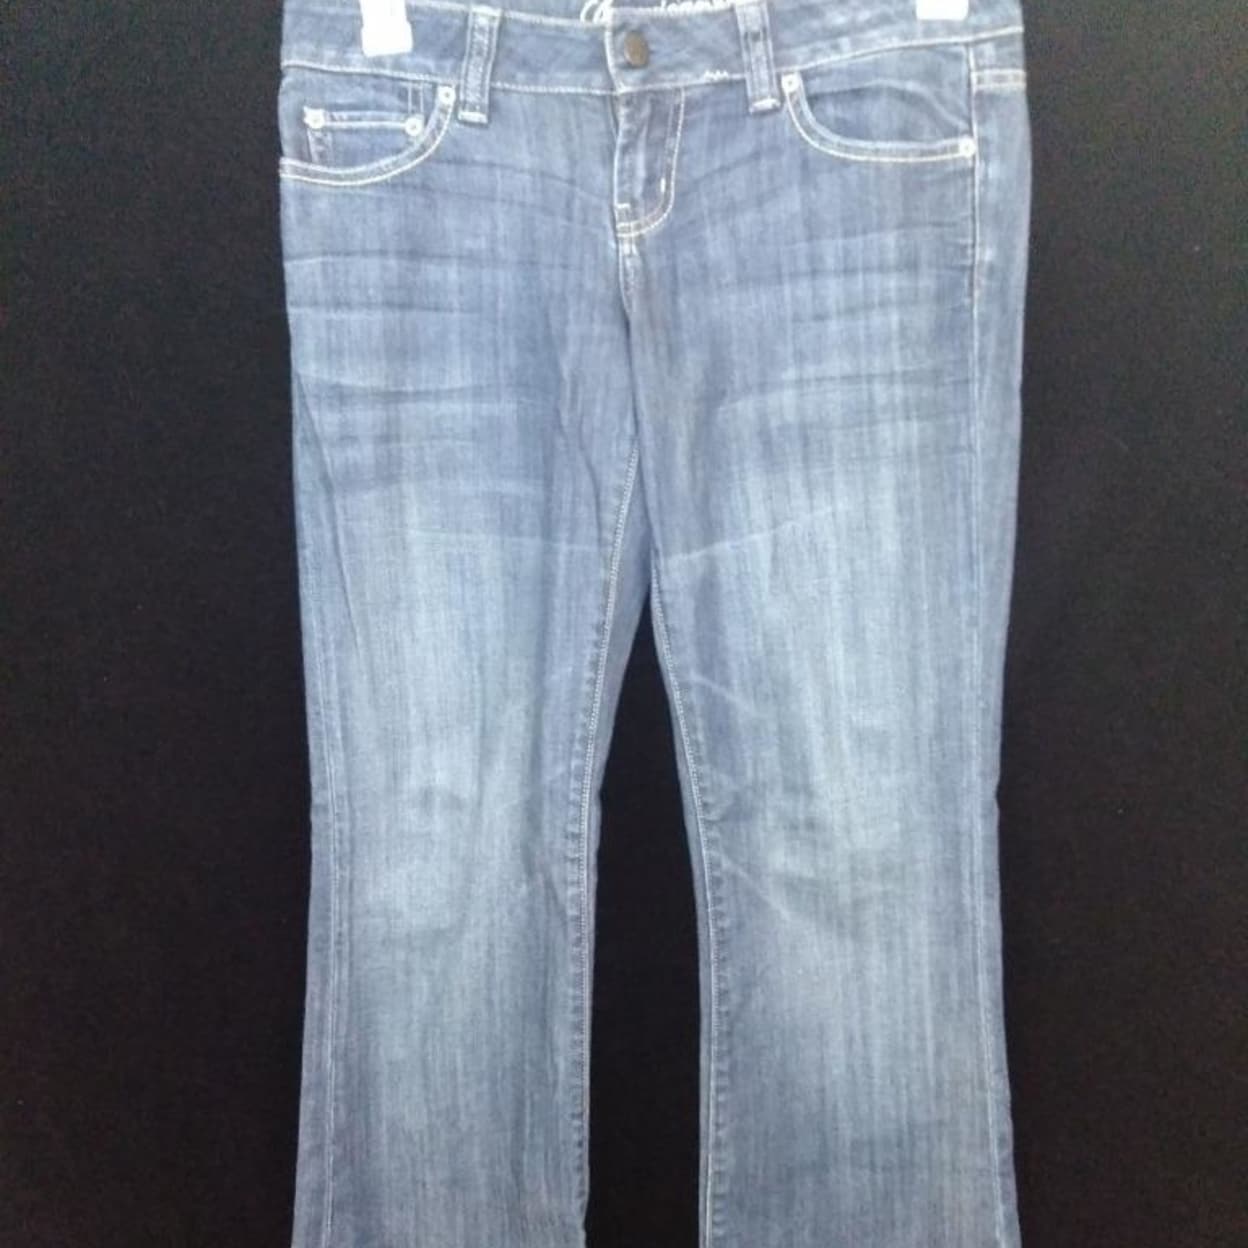 size 4 american eagle jeans